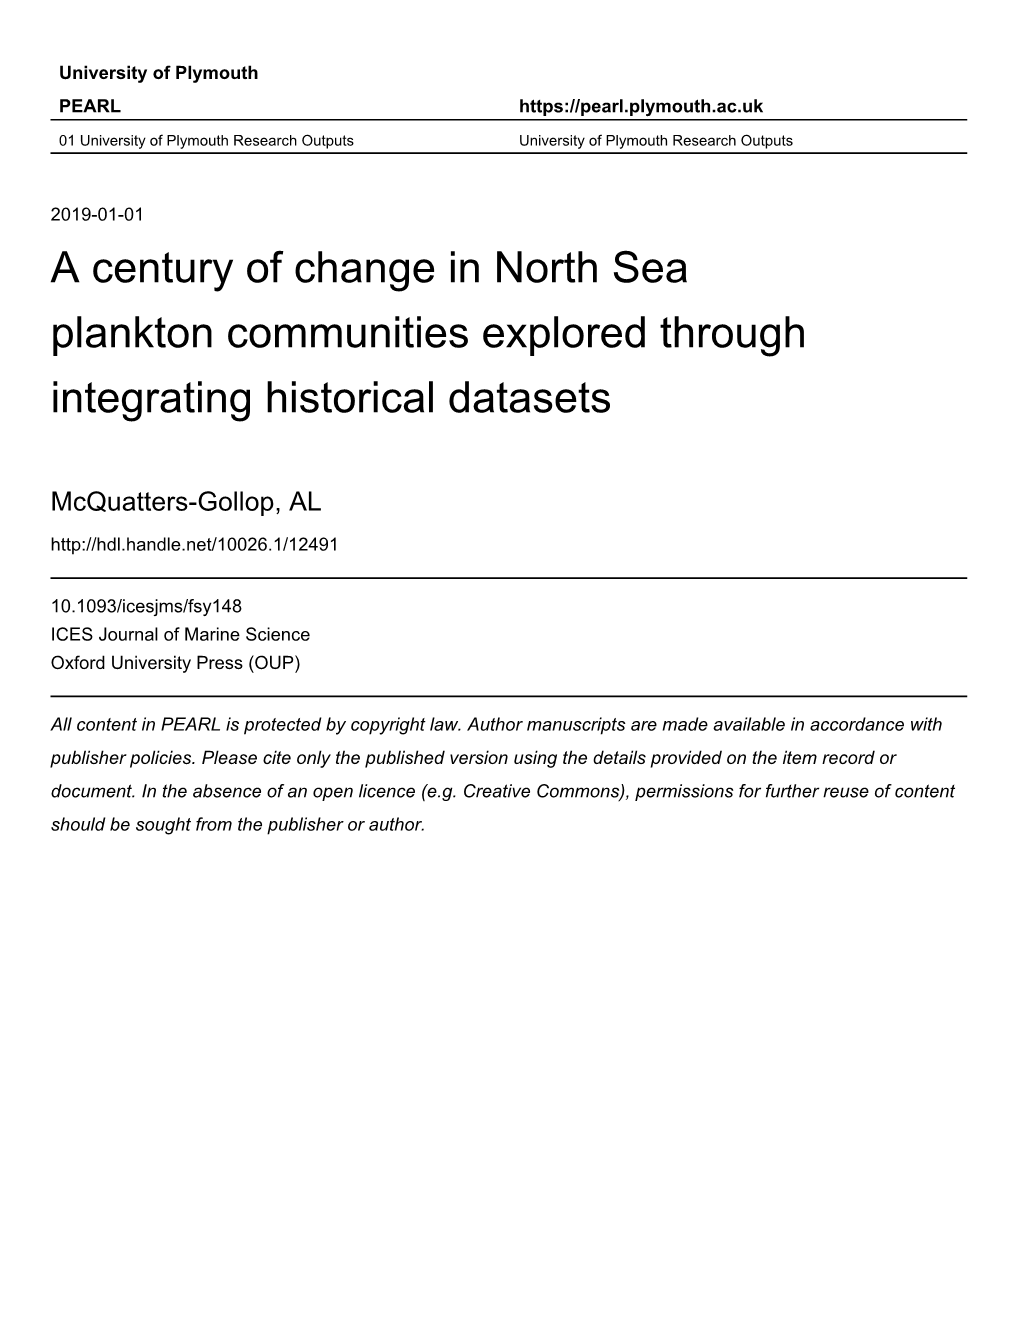 A Century of Change in North Sea Plankton Communities Explored Through Integrating Historical Datasets